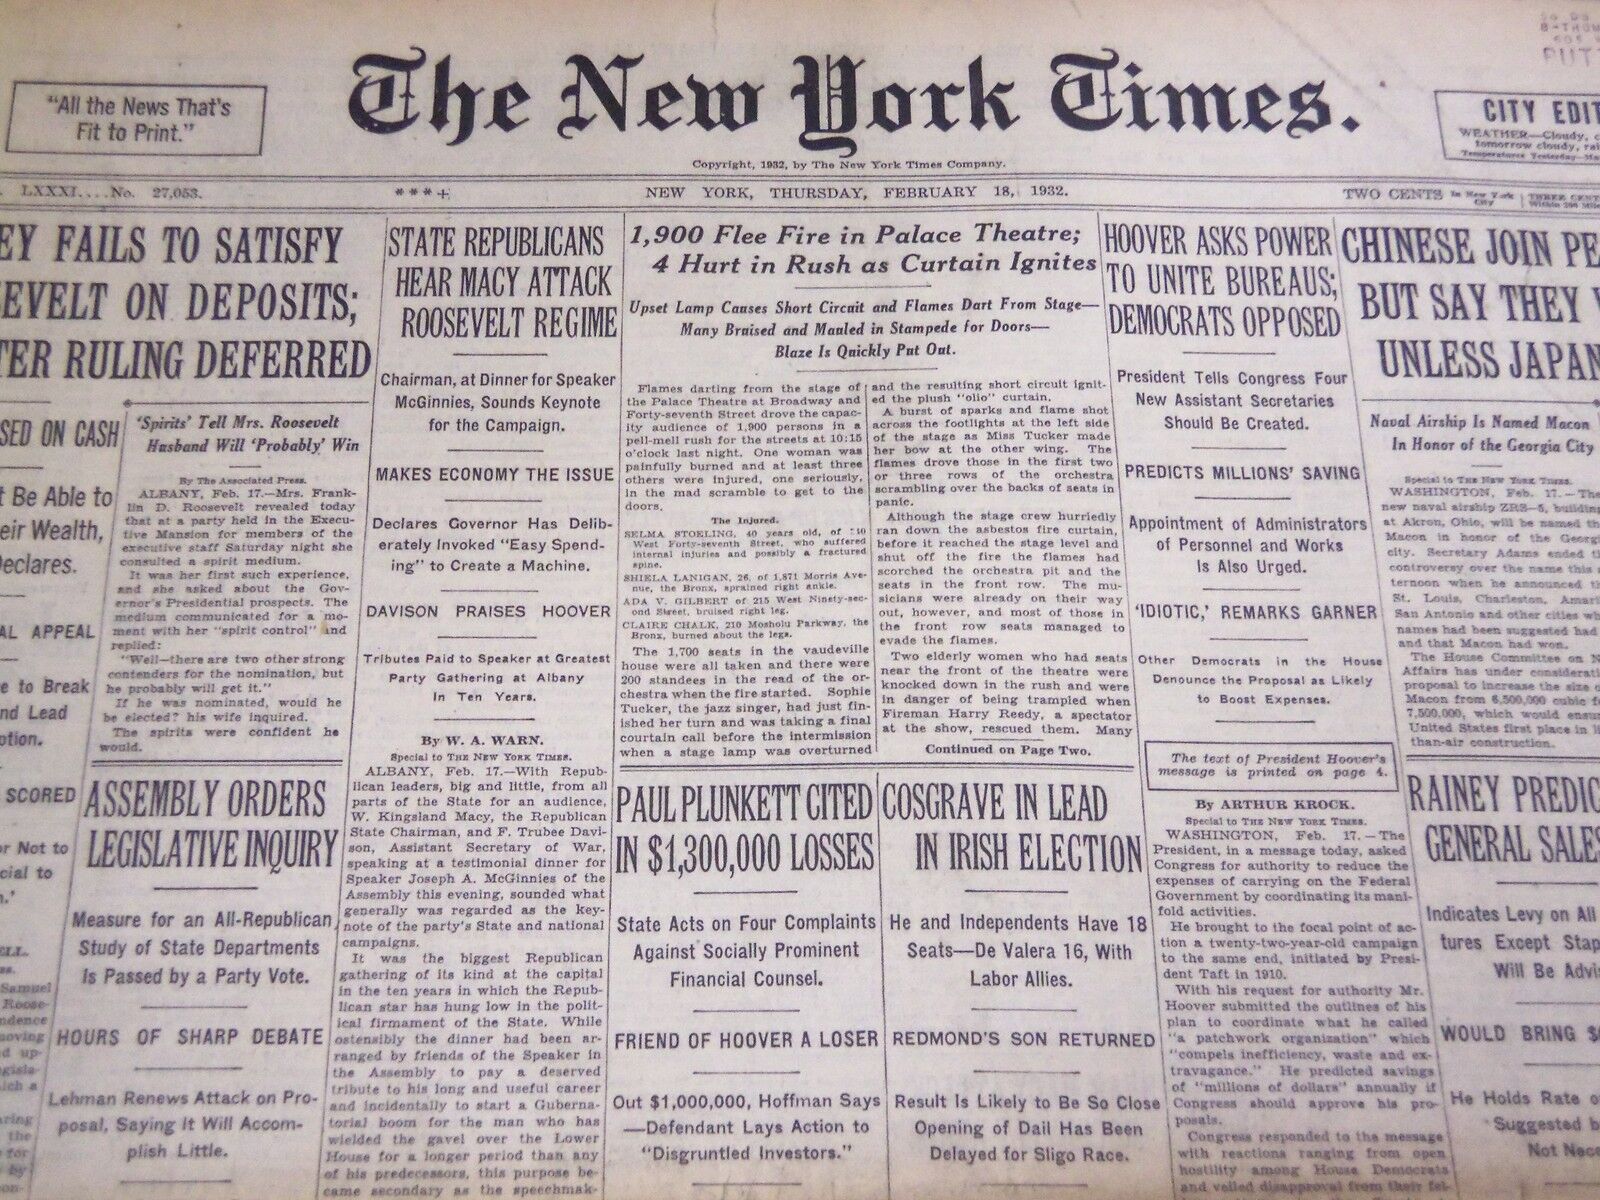 1932 FEBRUARY 18 NEW YORK TIMES - 1900 FLEE FIRE IN PALACE THEATRE - NT 4791